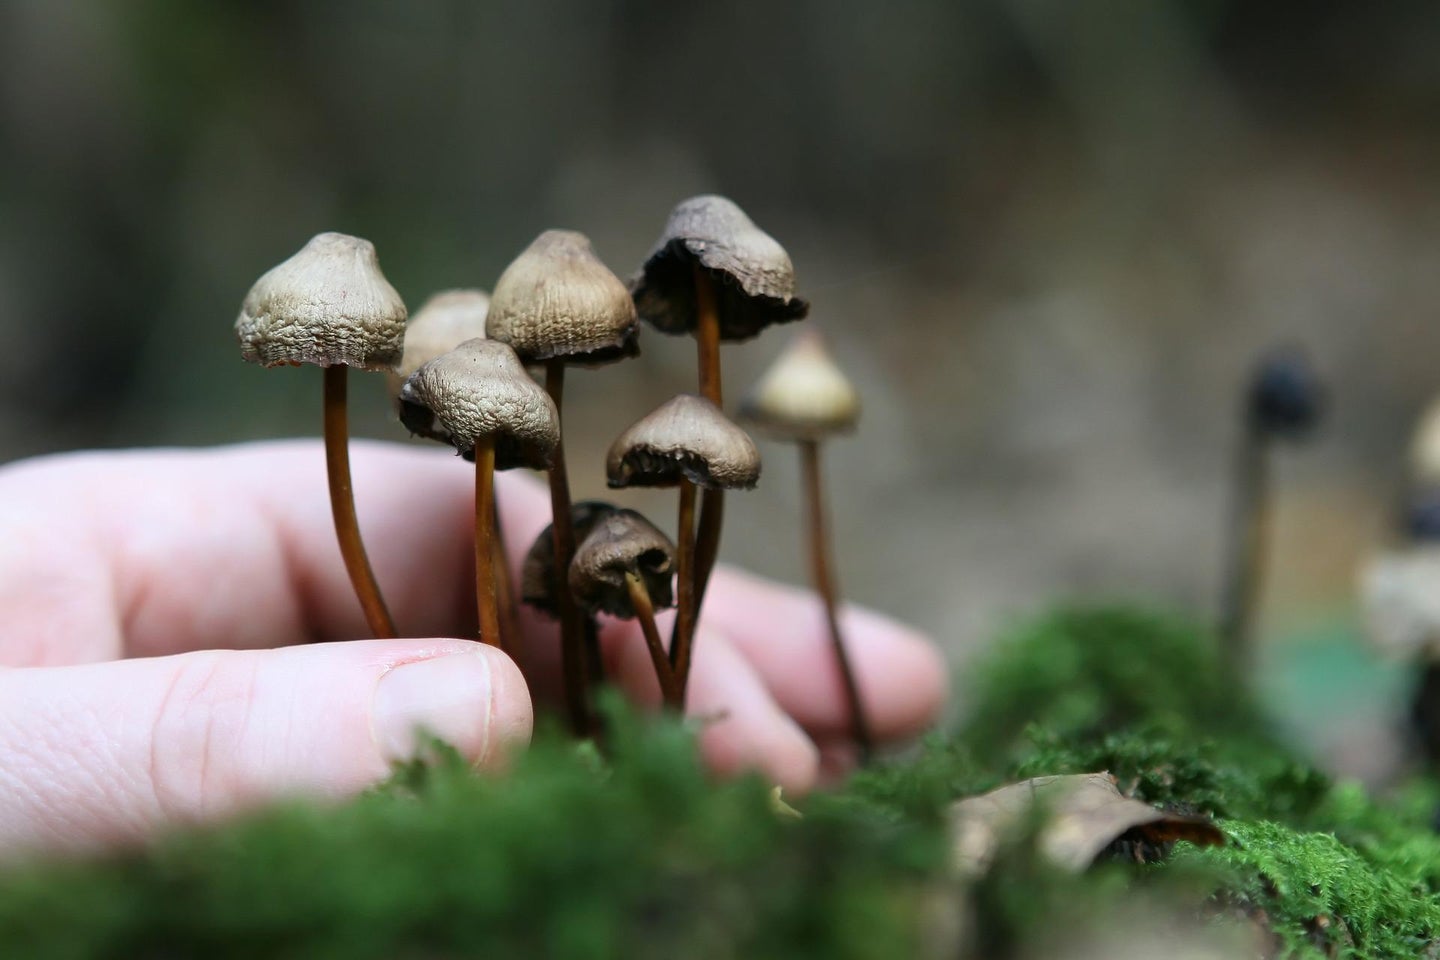 Psychoactive mushrooms may help patients with depression.